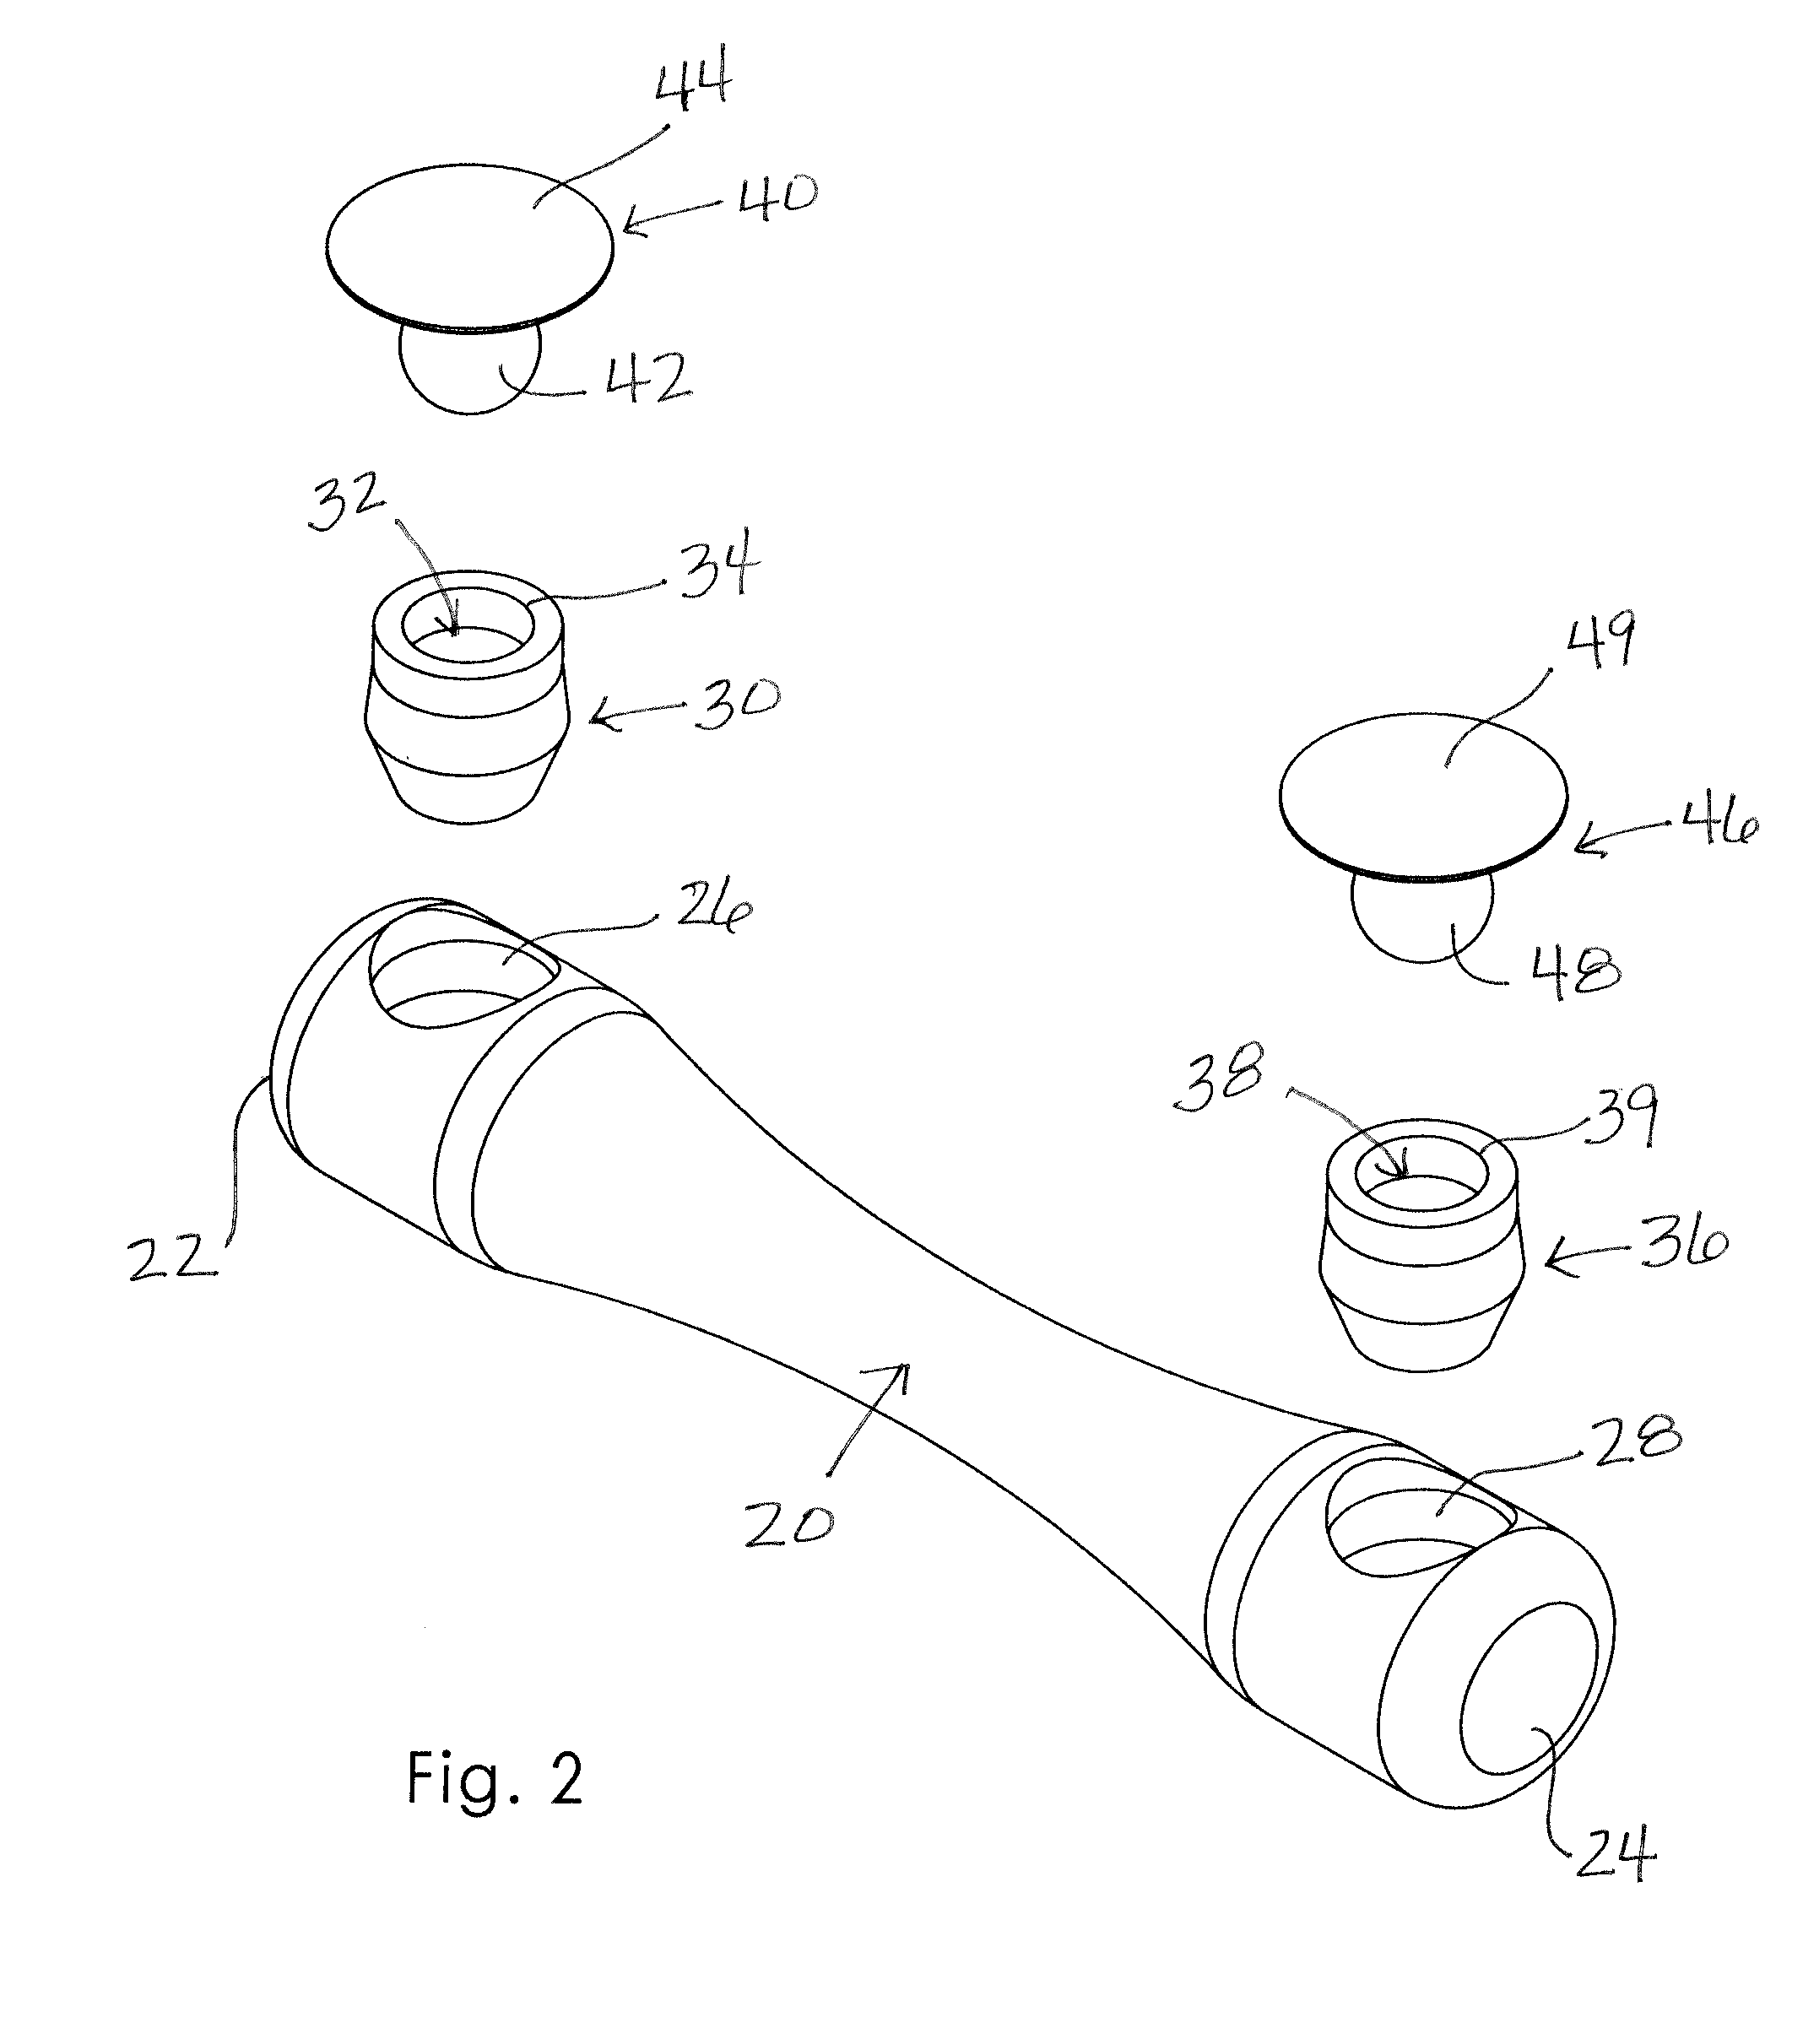 Method and Apparatus for Incrementally Repositioning the Mandible of a Patient